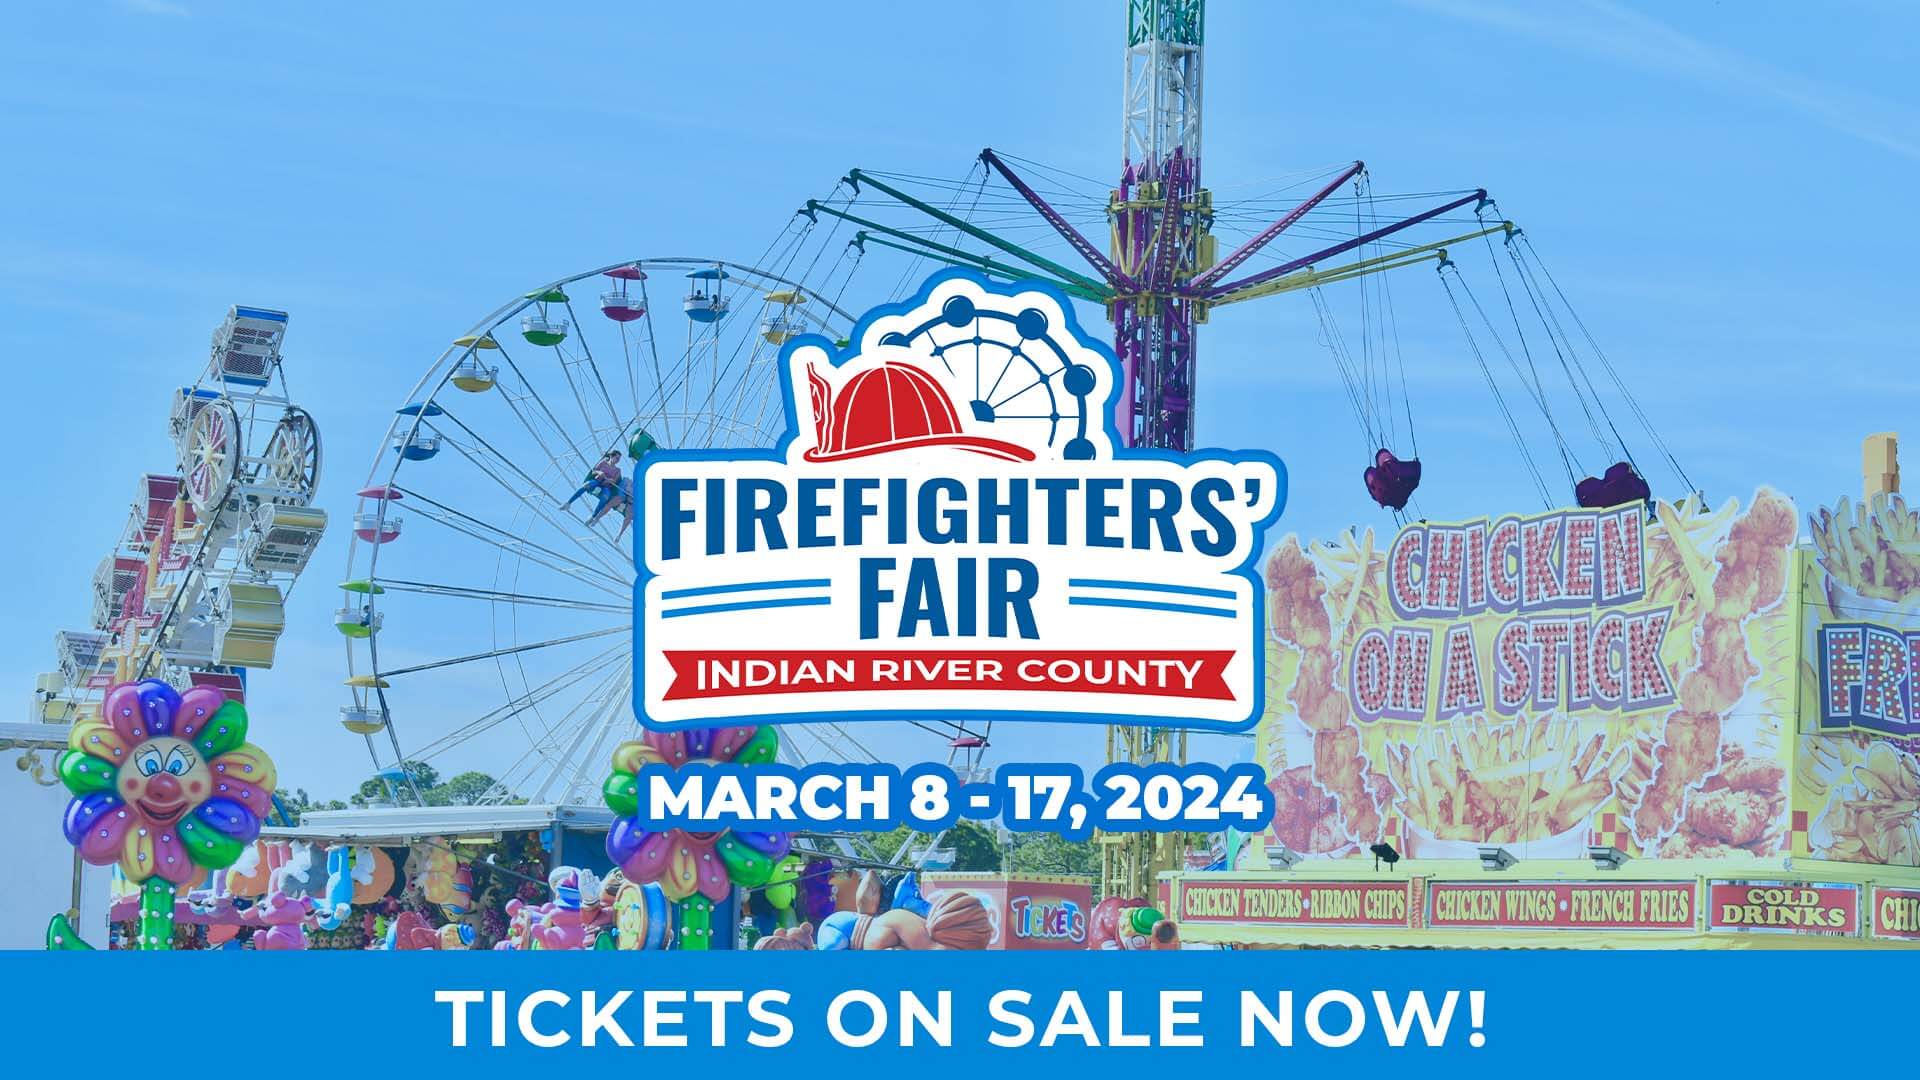 INDIAN RIVER COUNTY FIREFIGHTERS Fair Promotional Flyer